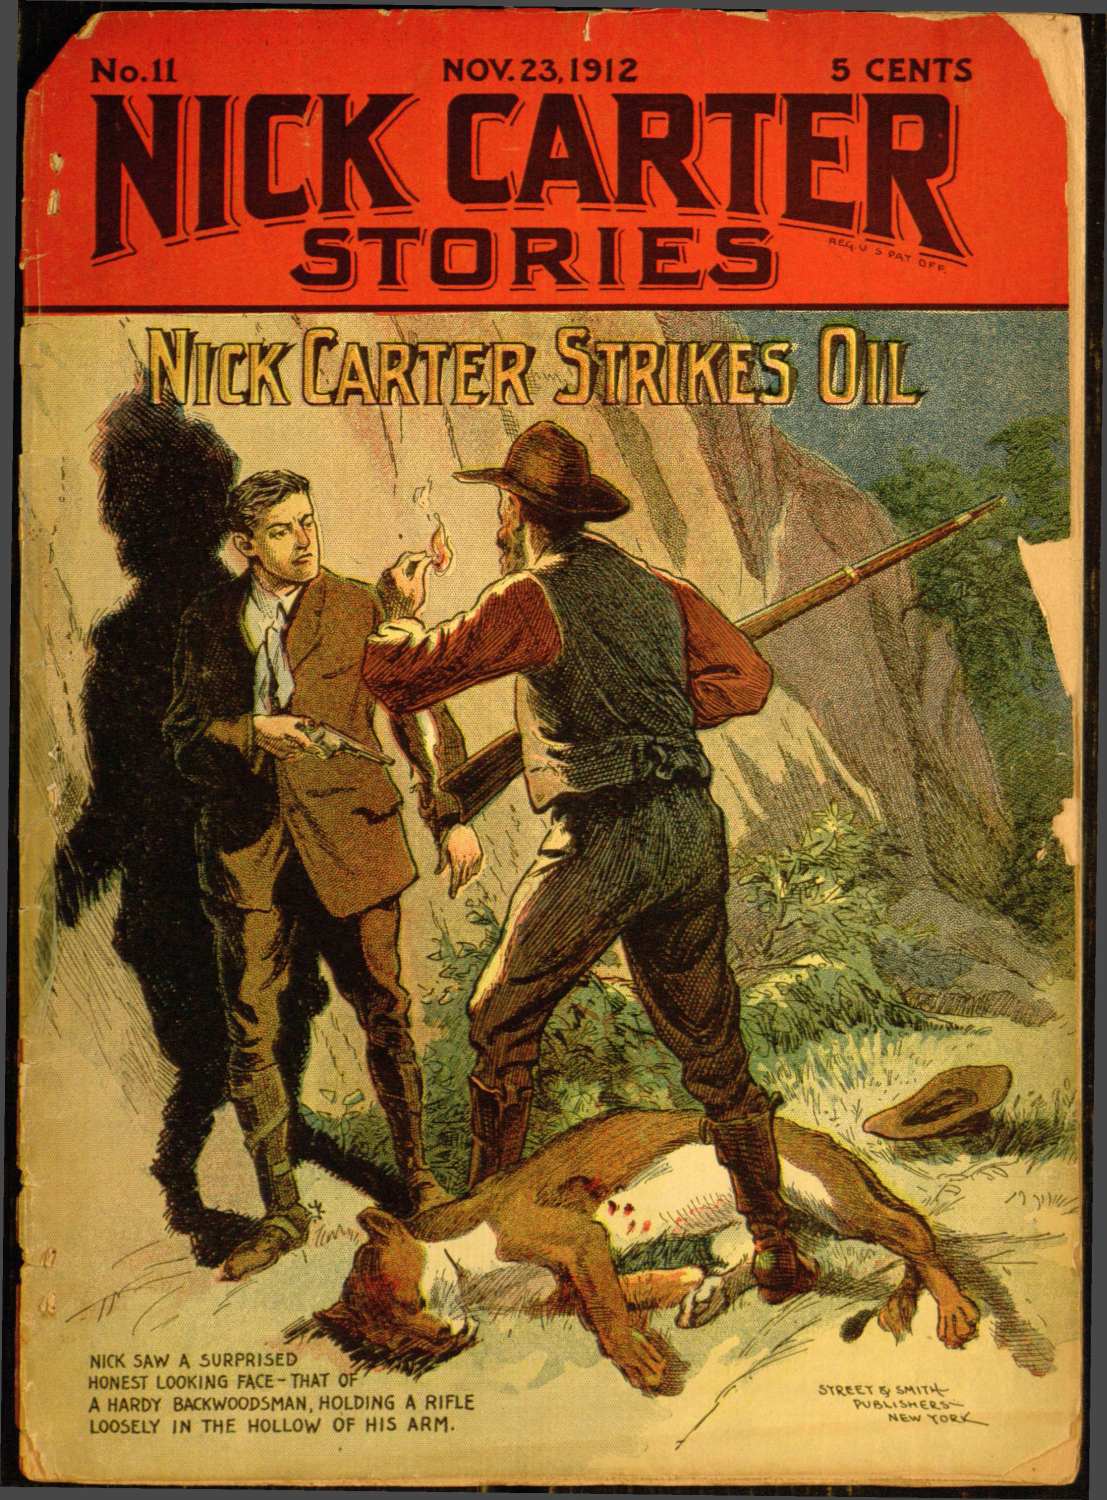 The Project Gutenberg eBook of Nick Carter Strikes Oil.